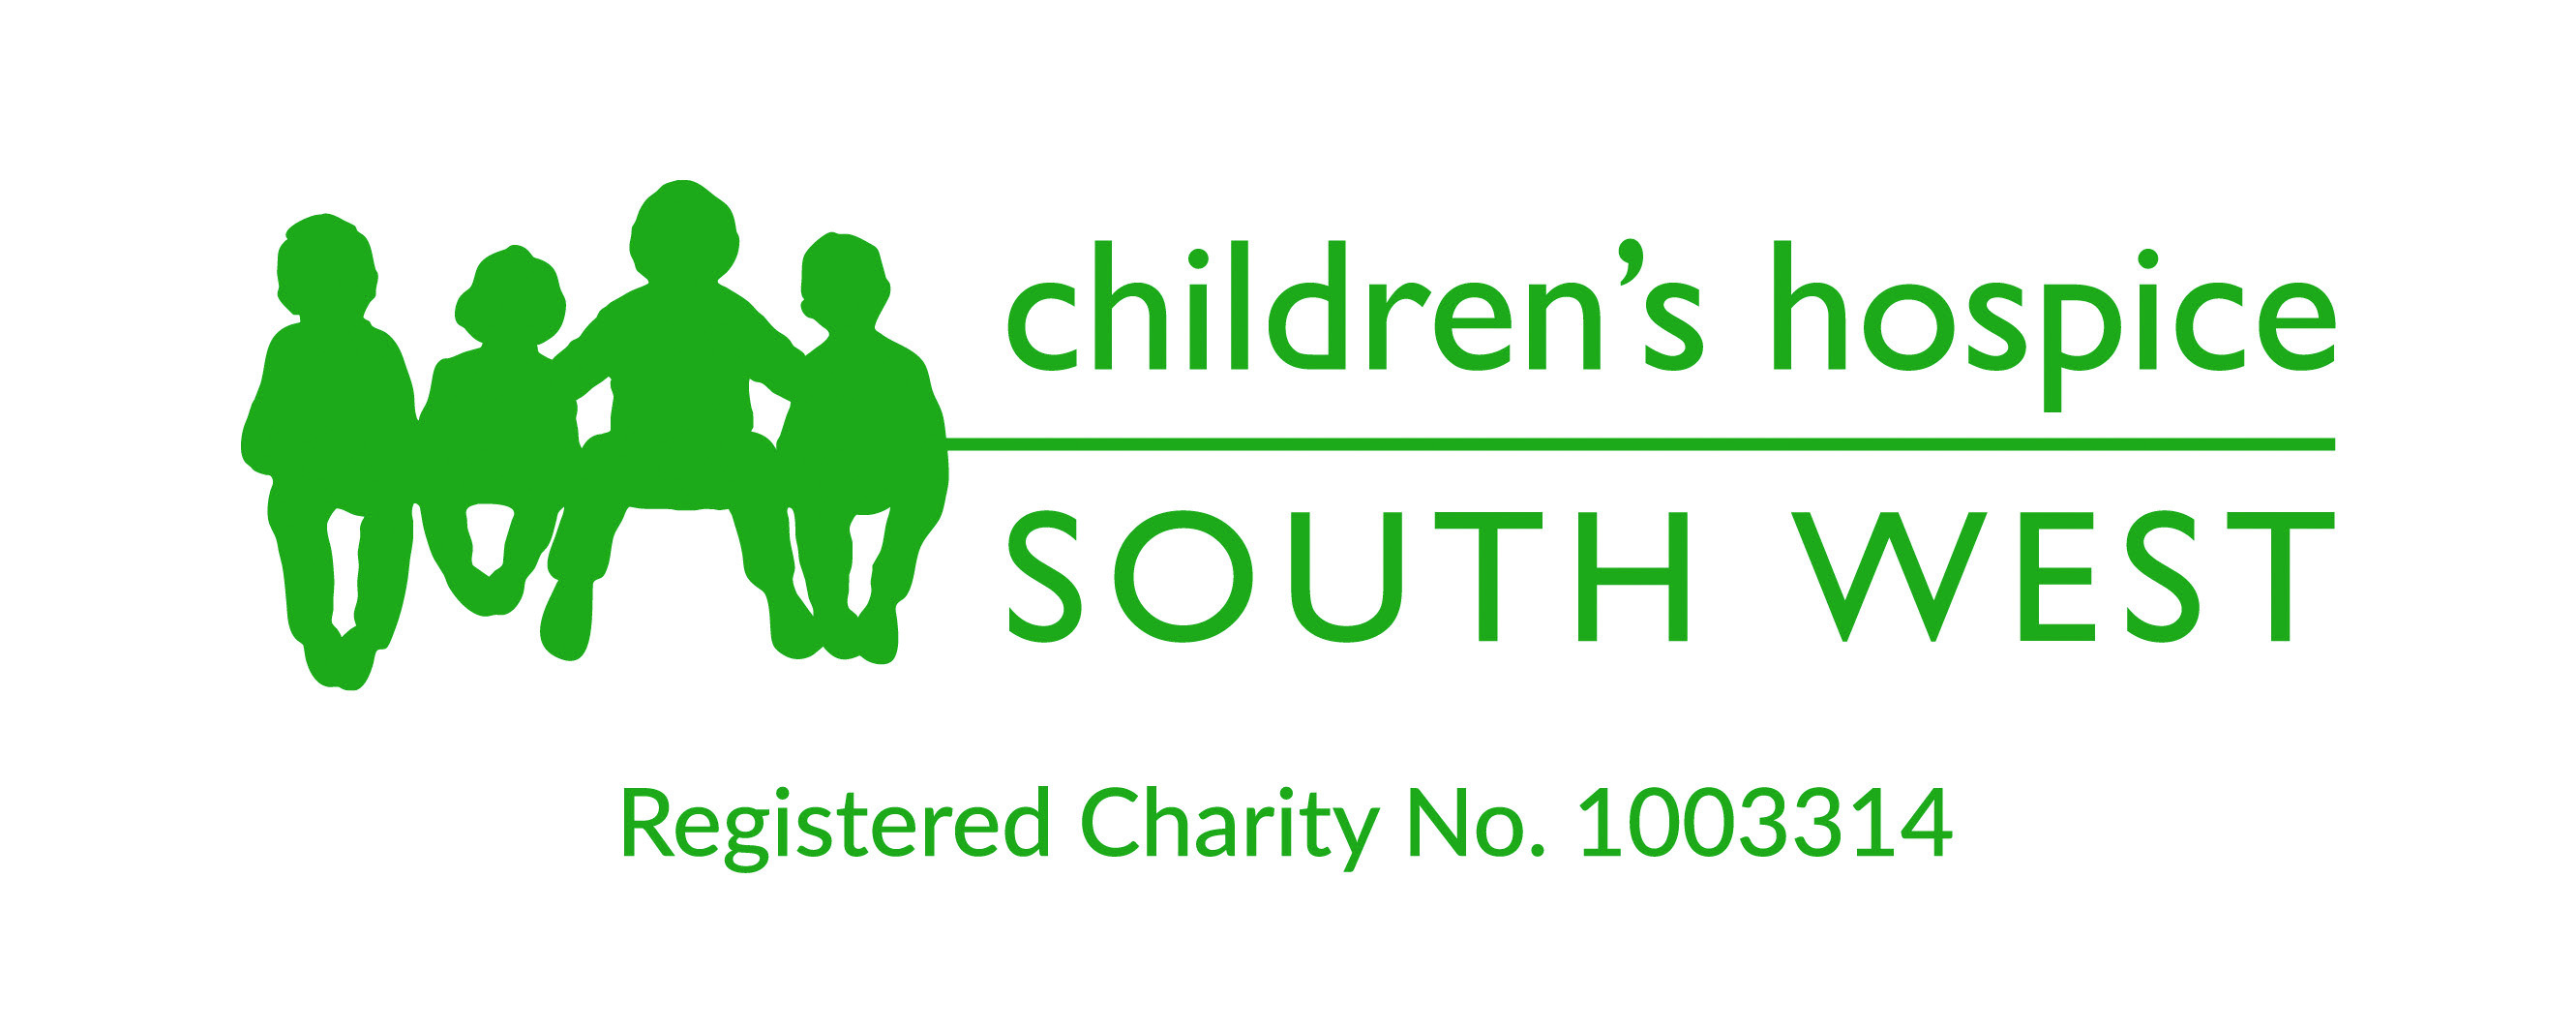 Children's hospice south west